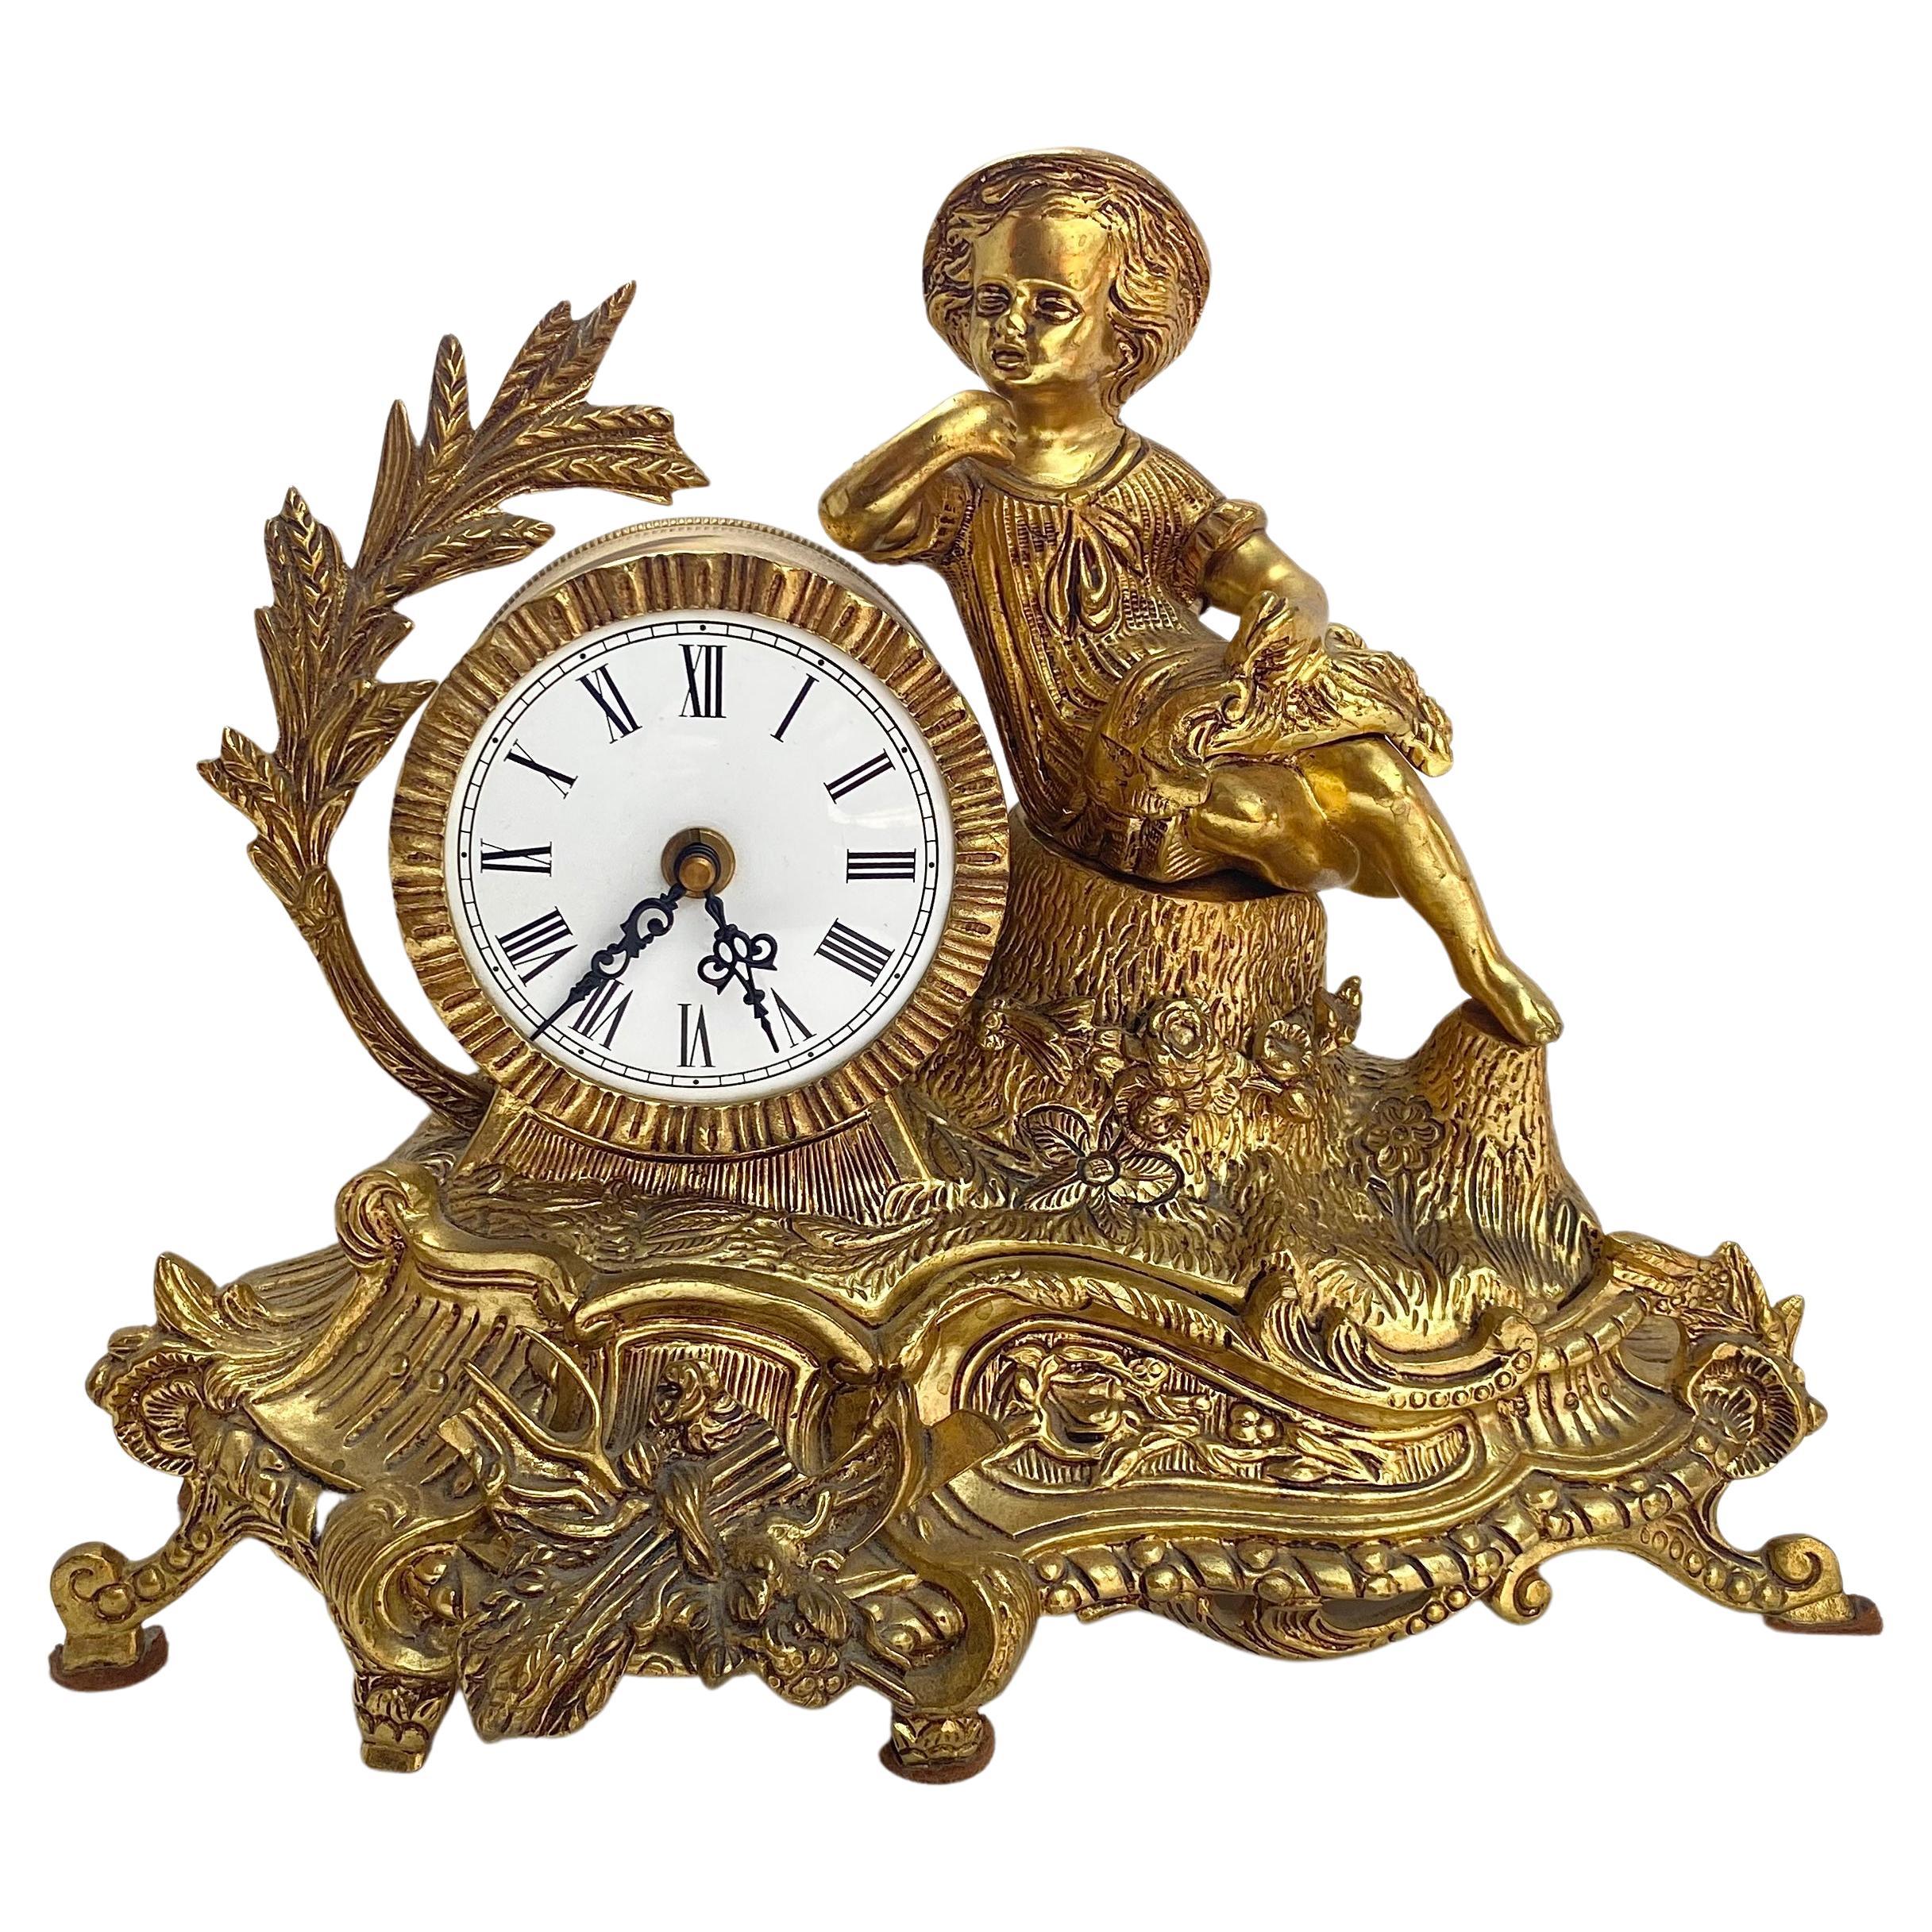 Midcentury Mantel Bronze Clock with Boy Figurine from France, circa 1960s For Sale